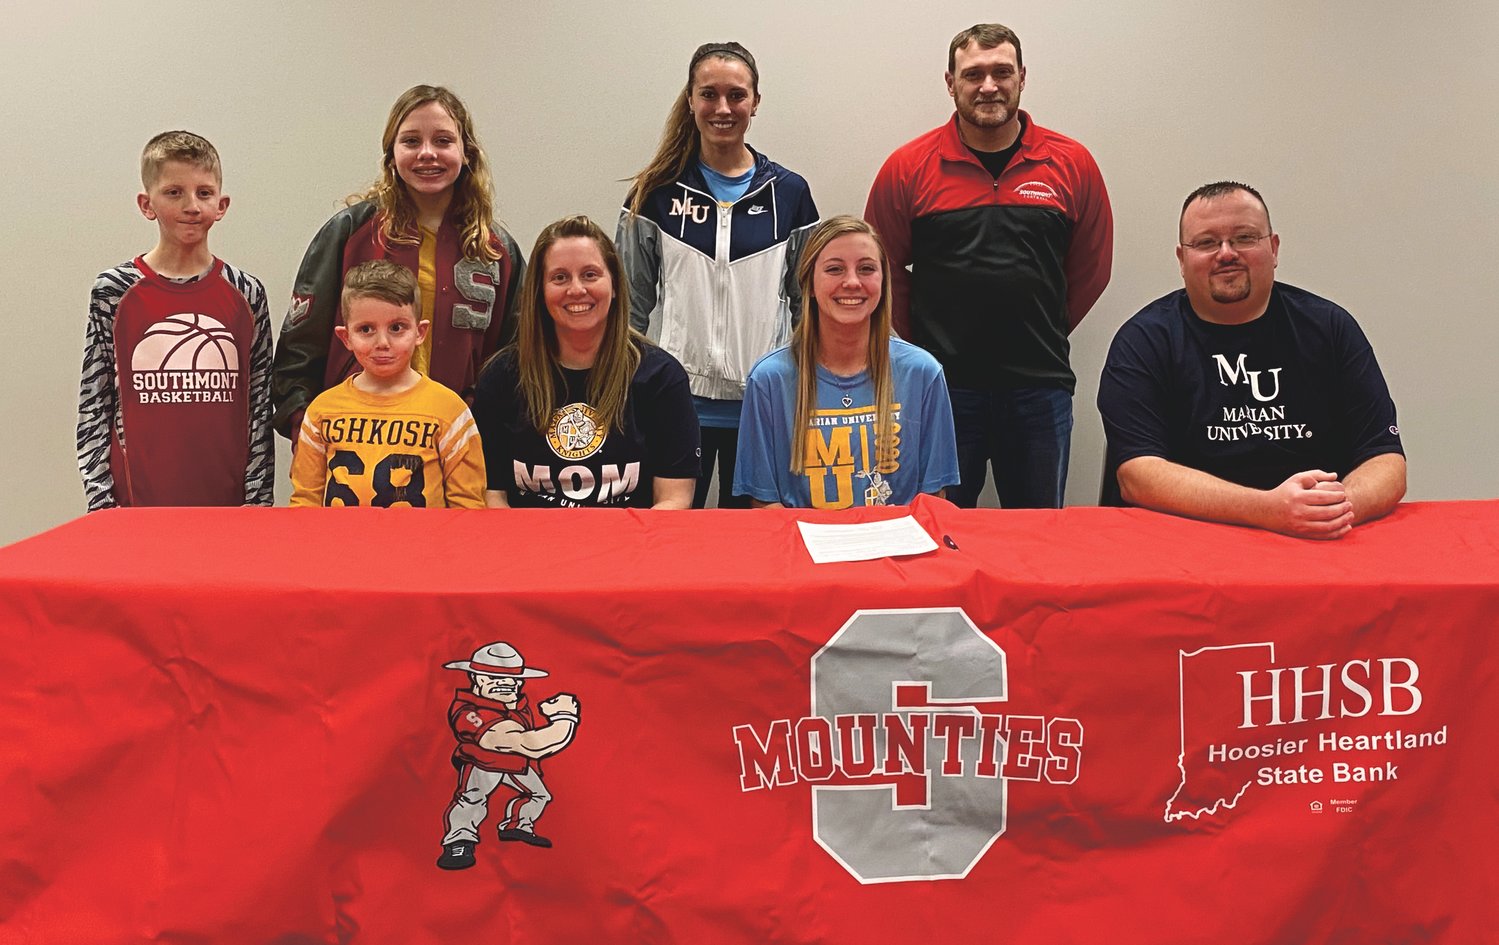 Southmont senior Lexie Odum committed to continue her track and field career at Marian University on Monday afternoon. PICTURED ABOVE: Lexie with her parents Dee and Philip Odum, brothers Finn and Gunner, and sister Lillie. Southmont track and field coach Desson Hannum, and Marian sprint coach Katie Wise.